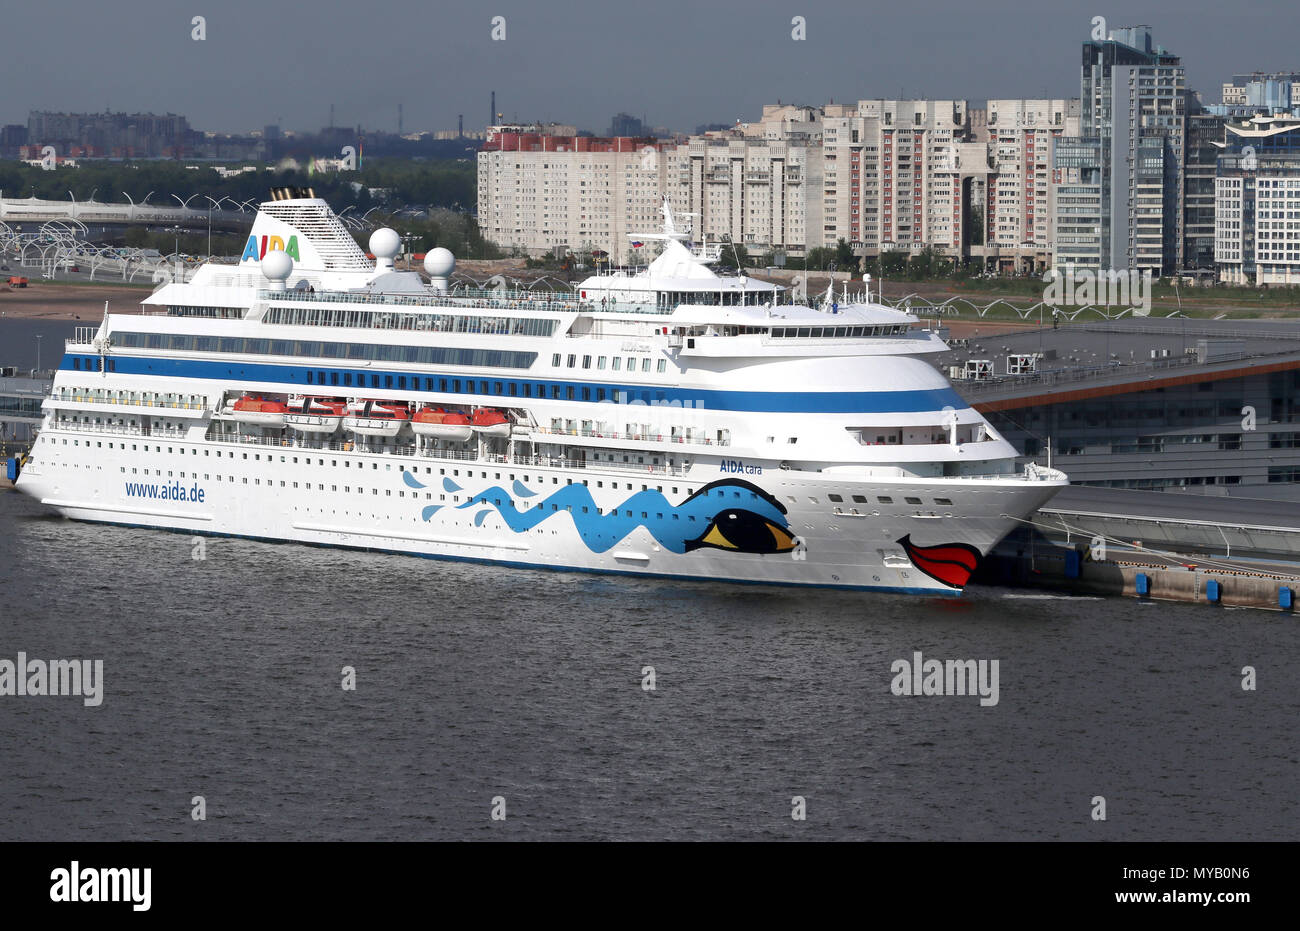 The 'AIDAcara', a cruise ship belonging to cruise company Carnival Corporation & plc. in the harbour in St Petersburg (Russia). Taken 10.06.2017. AIDAcara is the oldest and smallest of the AIDA ships. In the background are modern buildings. Photo: Peter Zimmermann/dpa-Zentralbild/ZB | usage worldwide Stock Photo